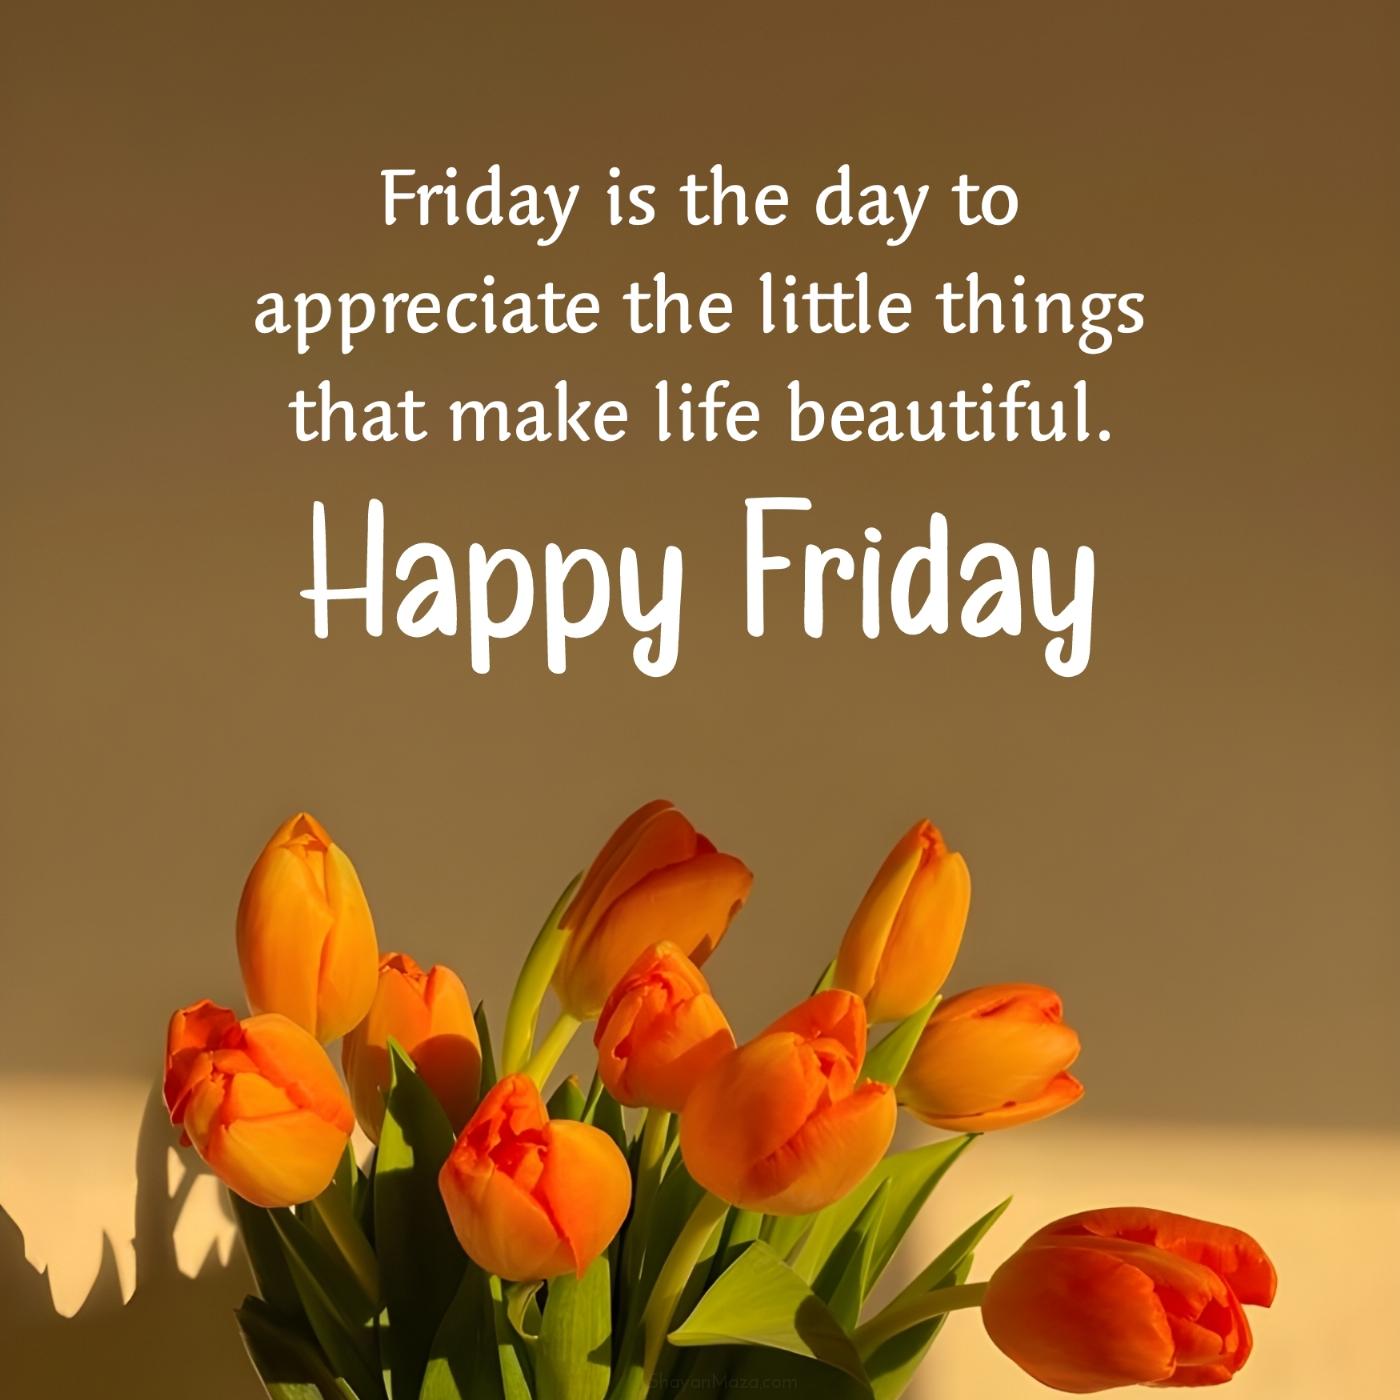 Friday is the day to appreciate the little things that make life beautiful